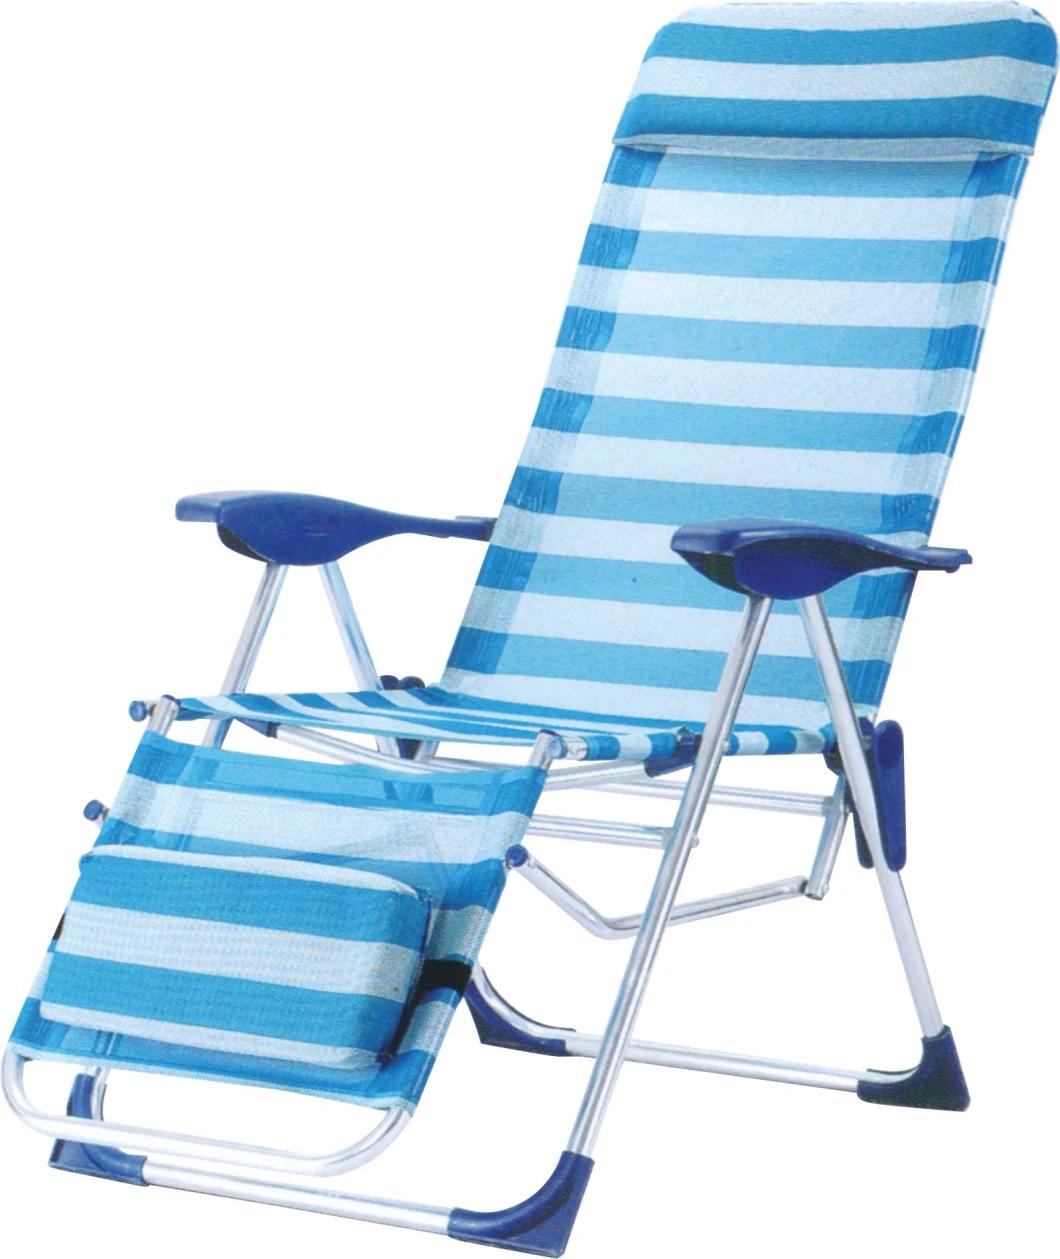 Hot Selling Foldable Beach Chair with Back Holder and Low Seat with or Without Pillow